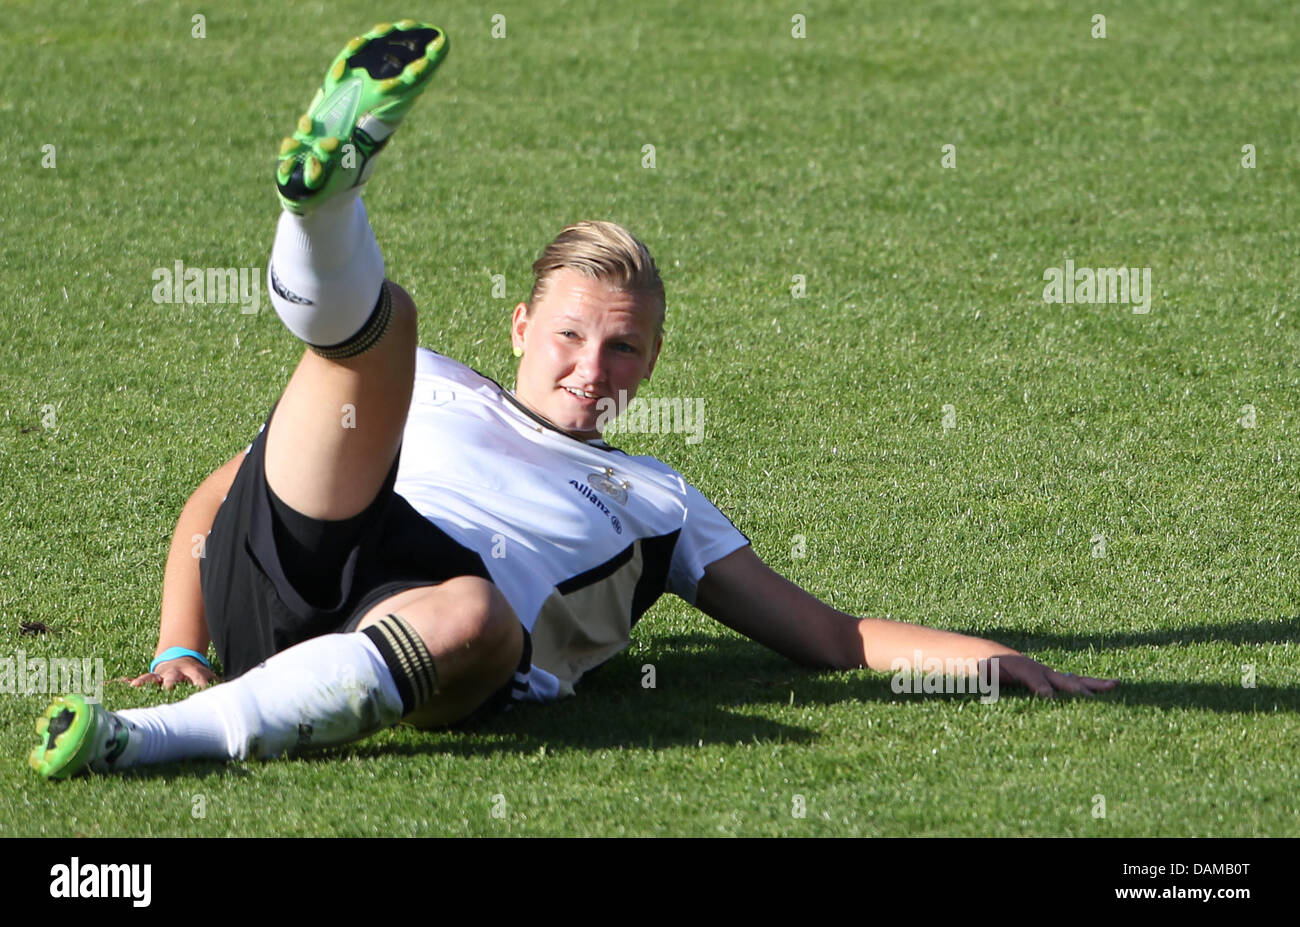 German national soccer player Alexandra Popp stretches during a training session of the national team in Osnabrueck, Germany, 02 June 2011. The team faces Italy for an international soccer match on 03 June 2011. Photo: Friso Gentsch Stock Photo